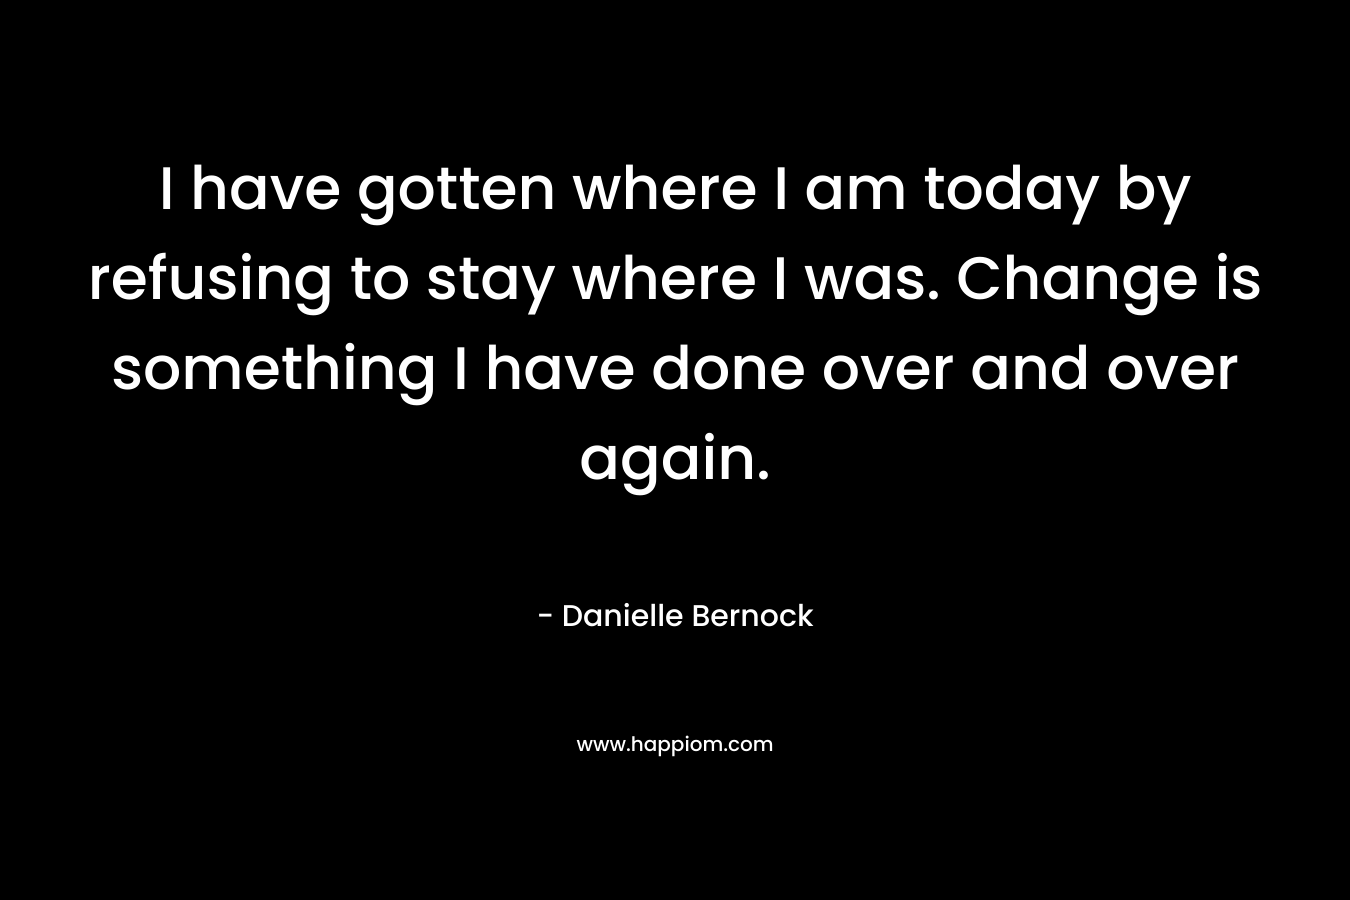 I have gotten where I am today by refusing to stay where I was. Change is something I have done over and over again. – Danielle Bernock